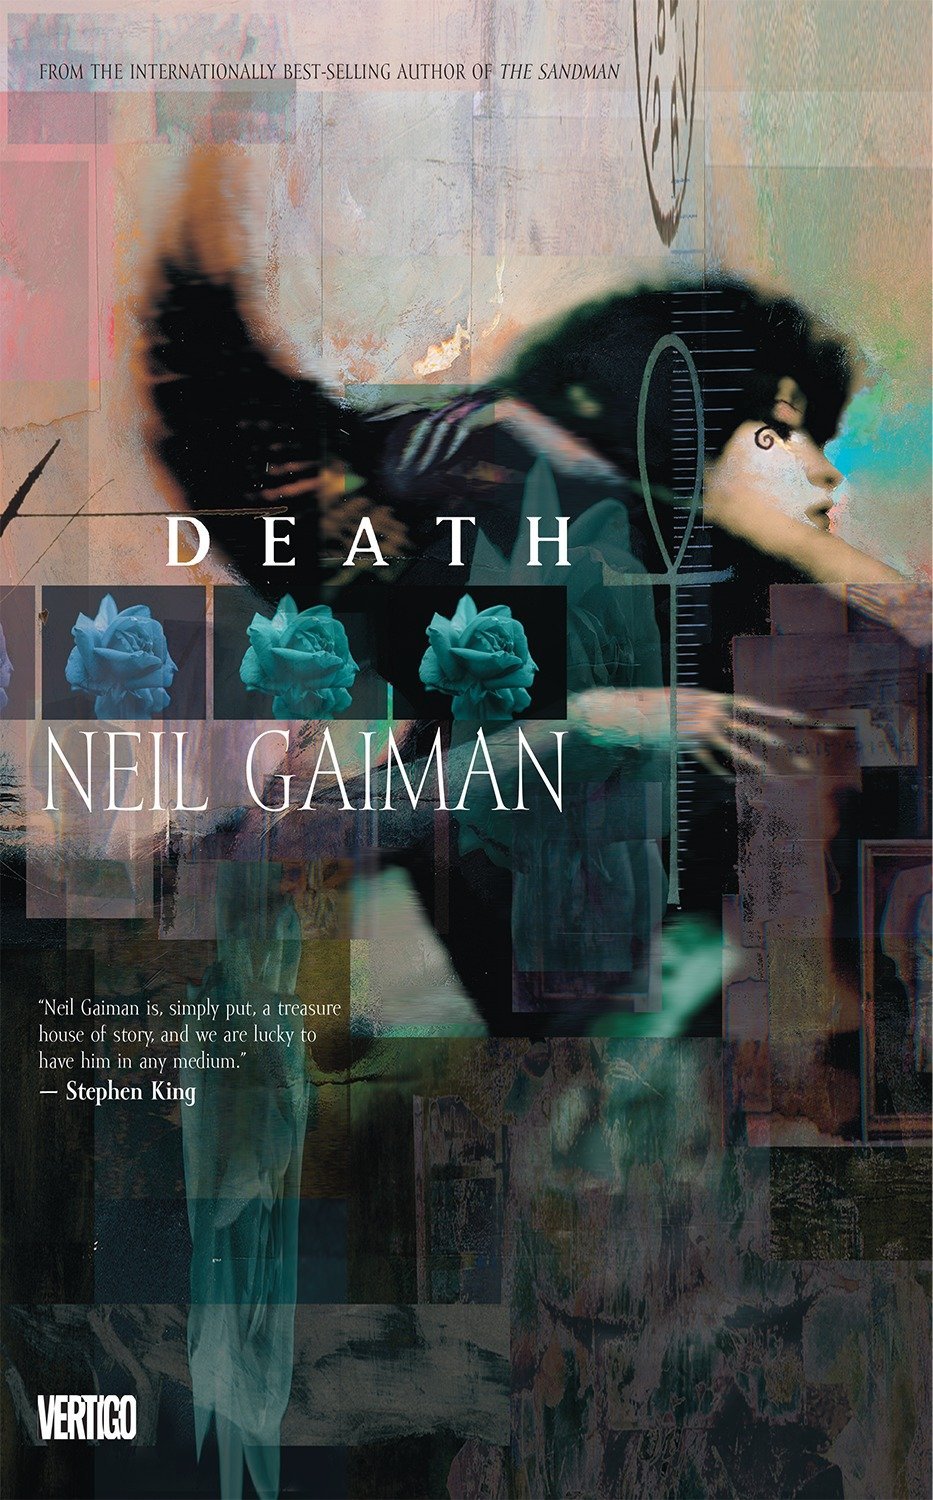 Death: The Deluxe Edition, by Neil Gaiman